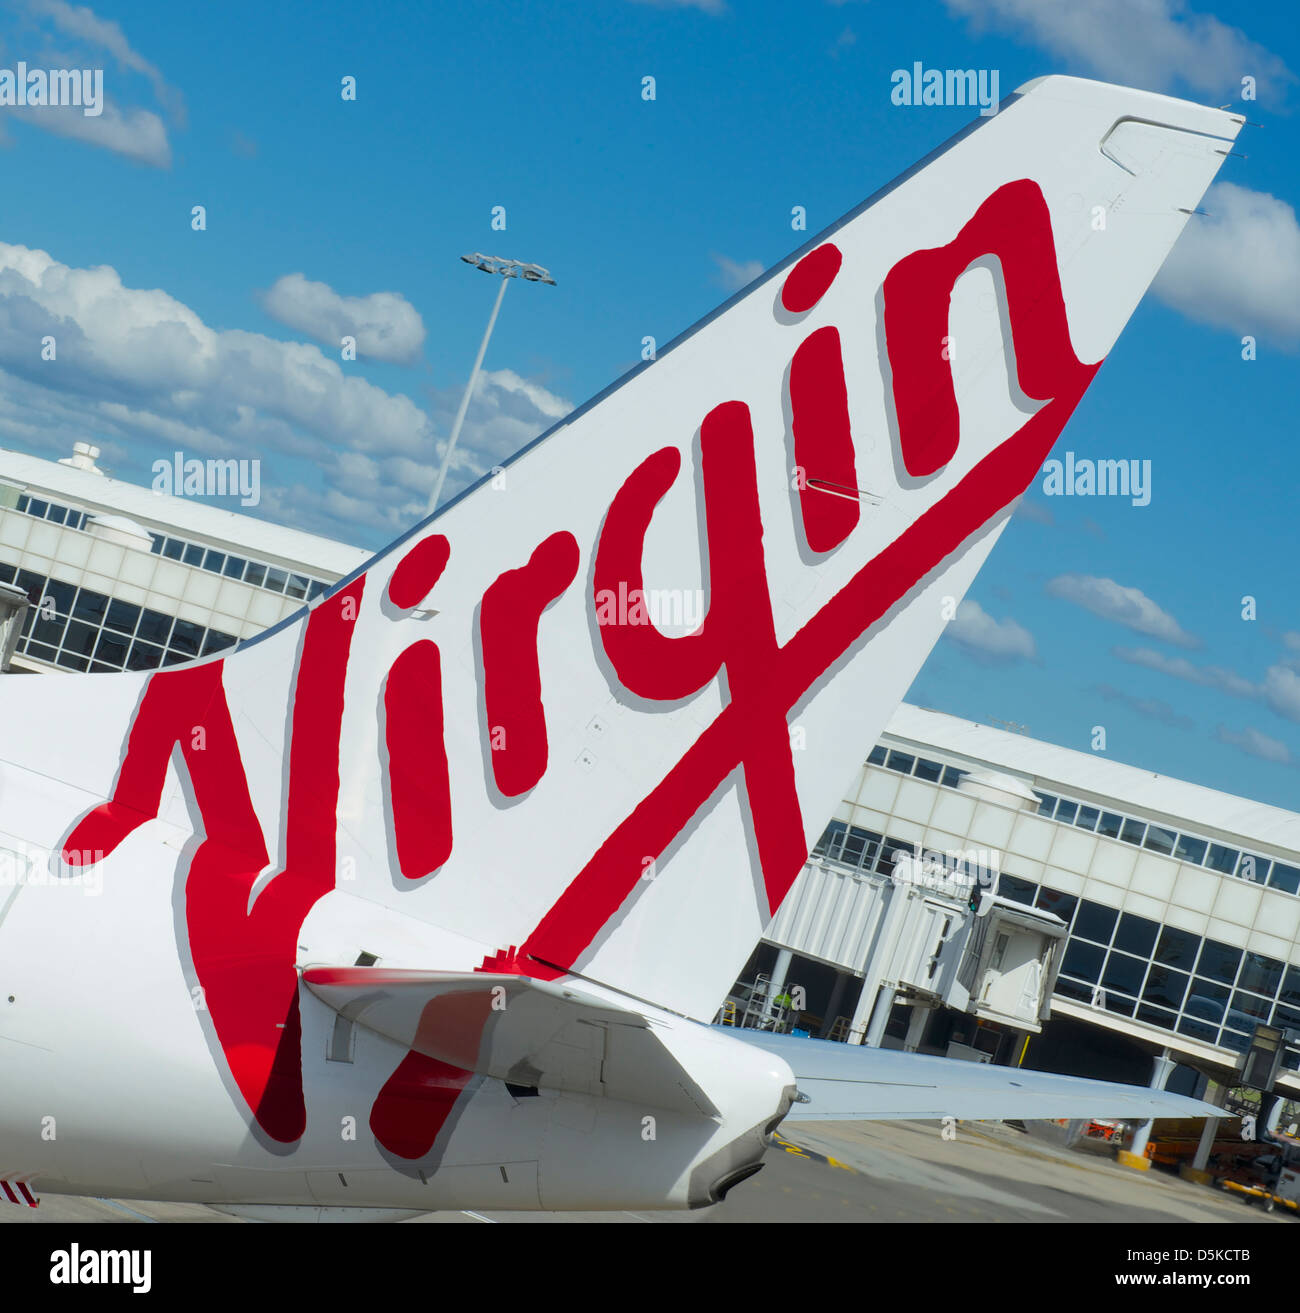 Tail fin of a Virgin Australia 320 aircraft at Sydney airport Stock Photo